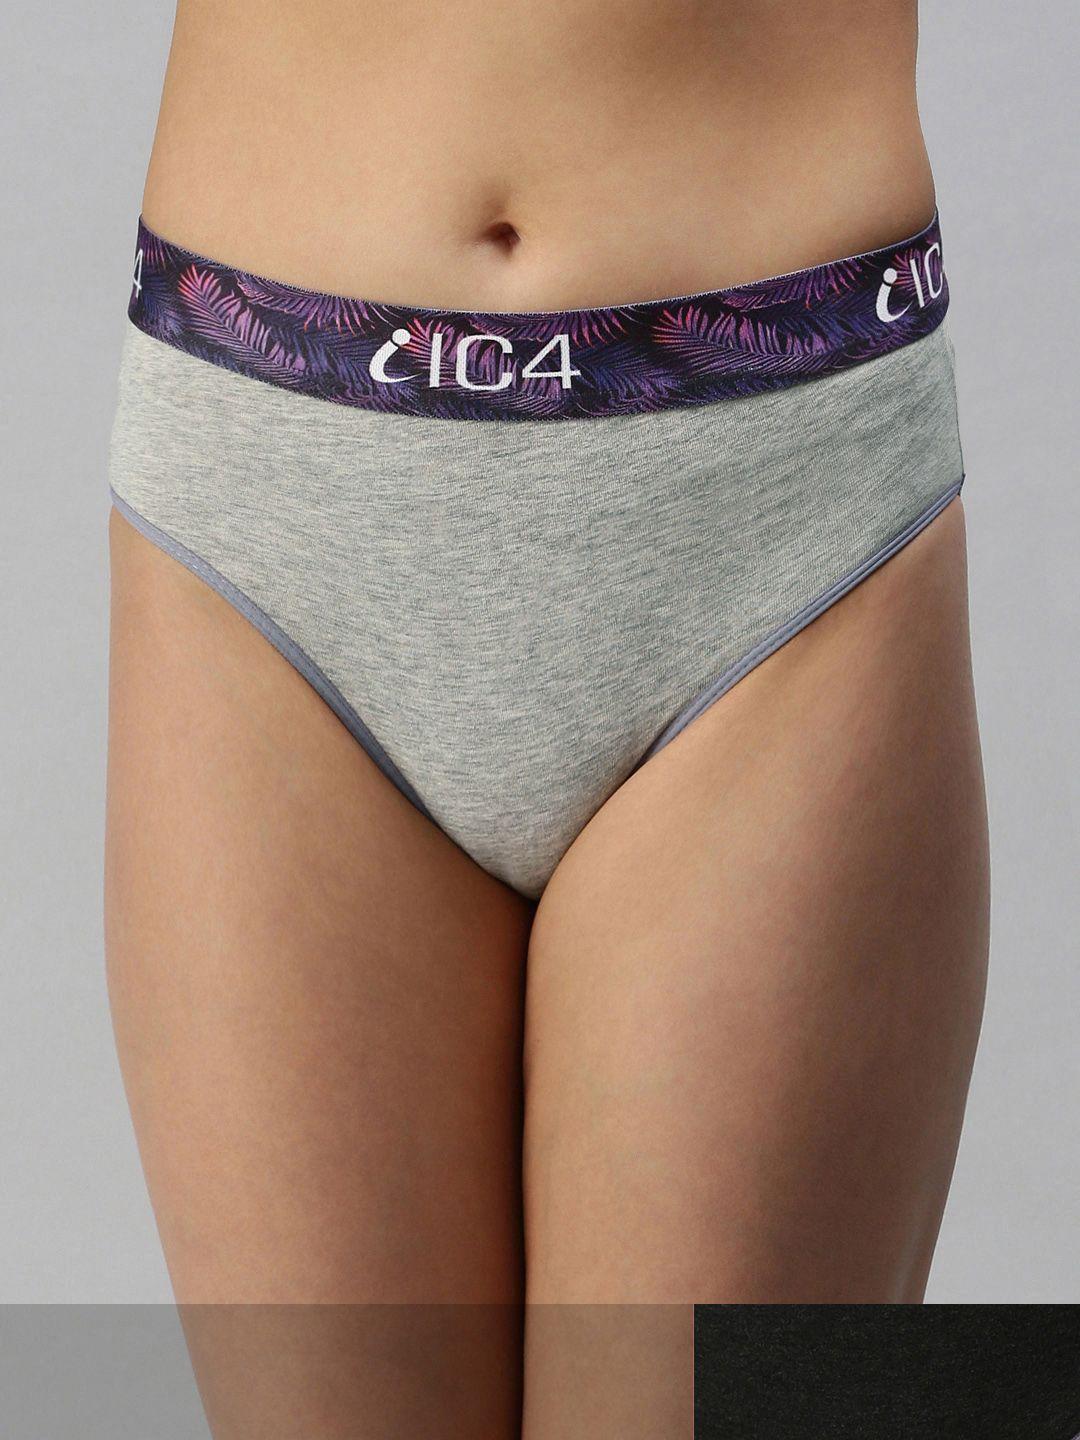 ic4-women-charcoal-&-grey-melange-solid-pack-of-2-hipster-briefs--0c-g-1011p2